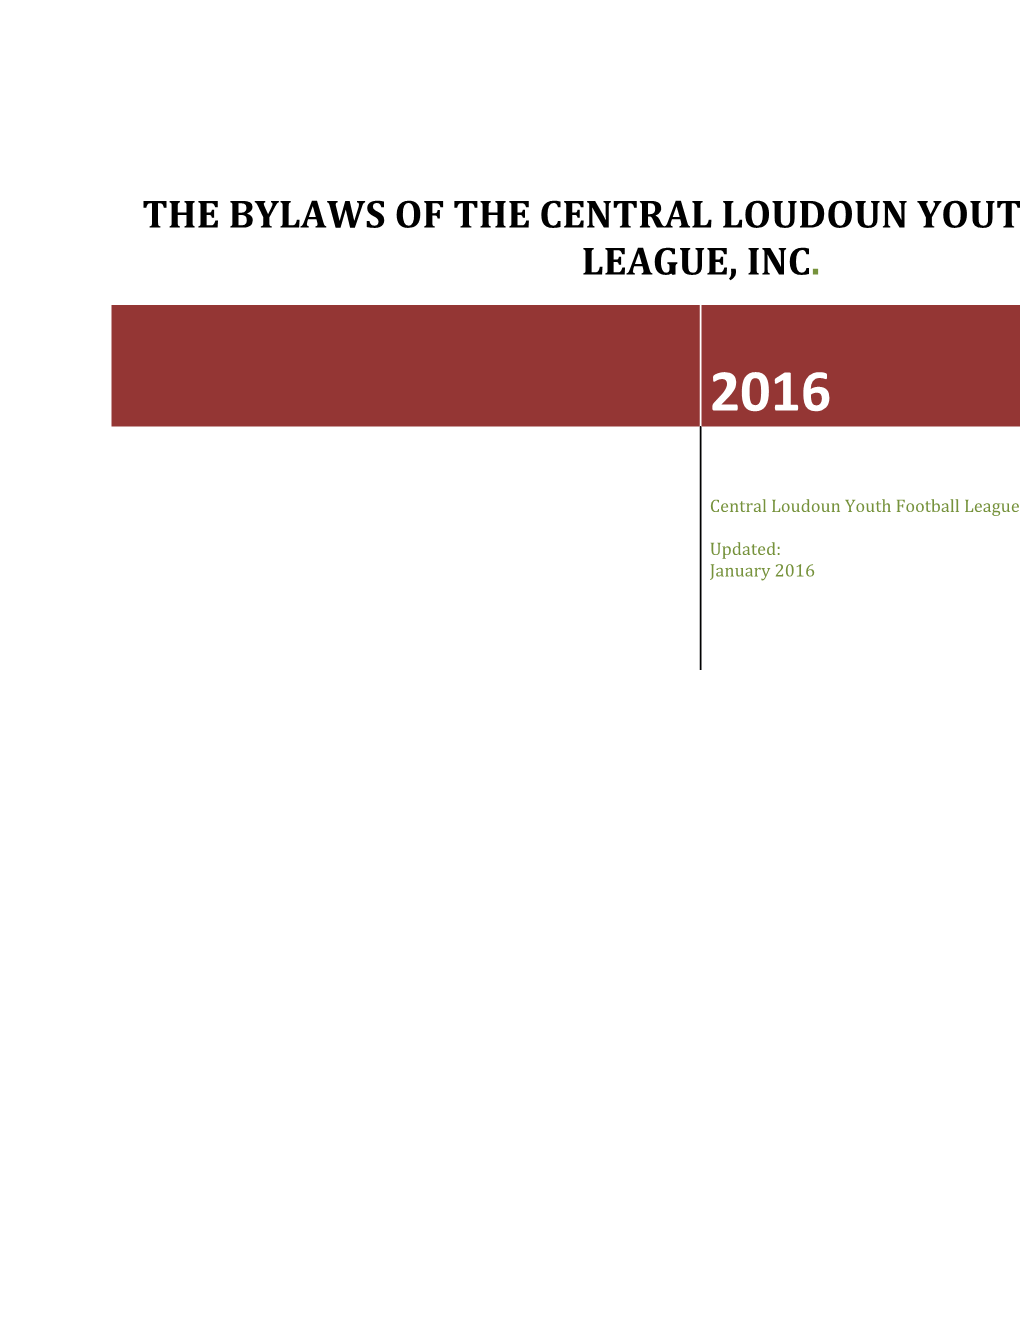 The Bylaws of the Central Loudoun Youth Football League, Inc